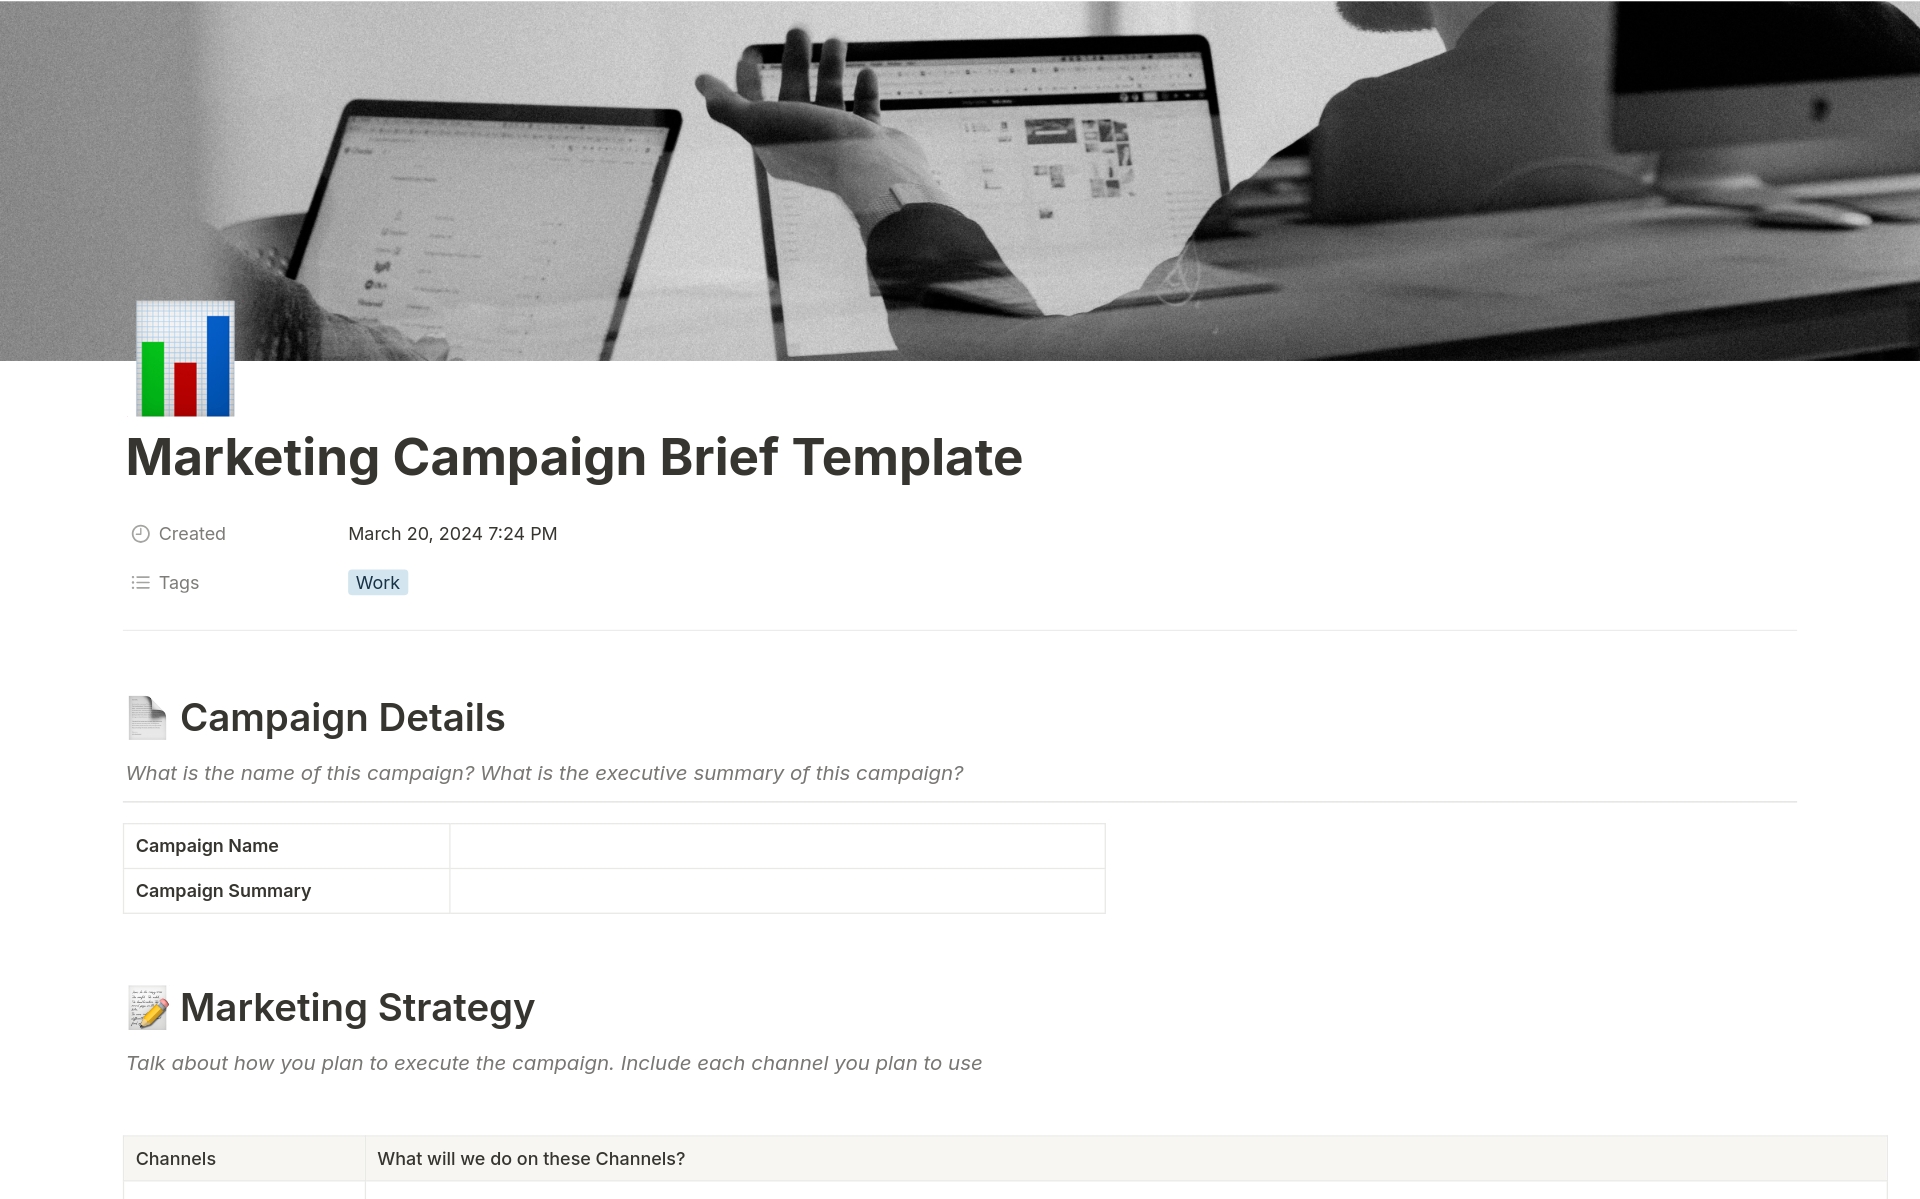 Streamline campaign planning with our Marketing Brief Template. Define strategy, roles, objectives, audience, message, deliverables, budget, and timelines effortlessly.